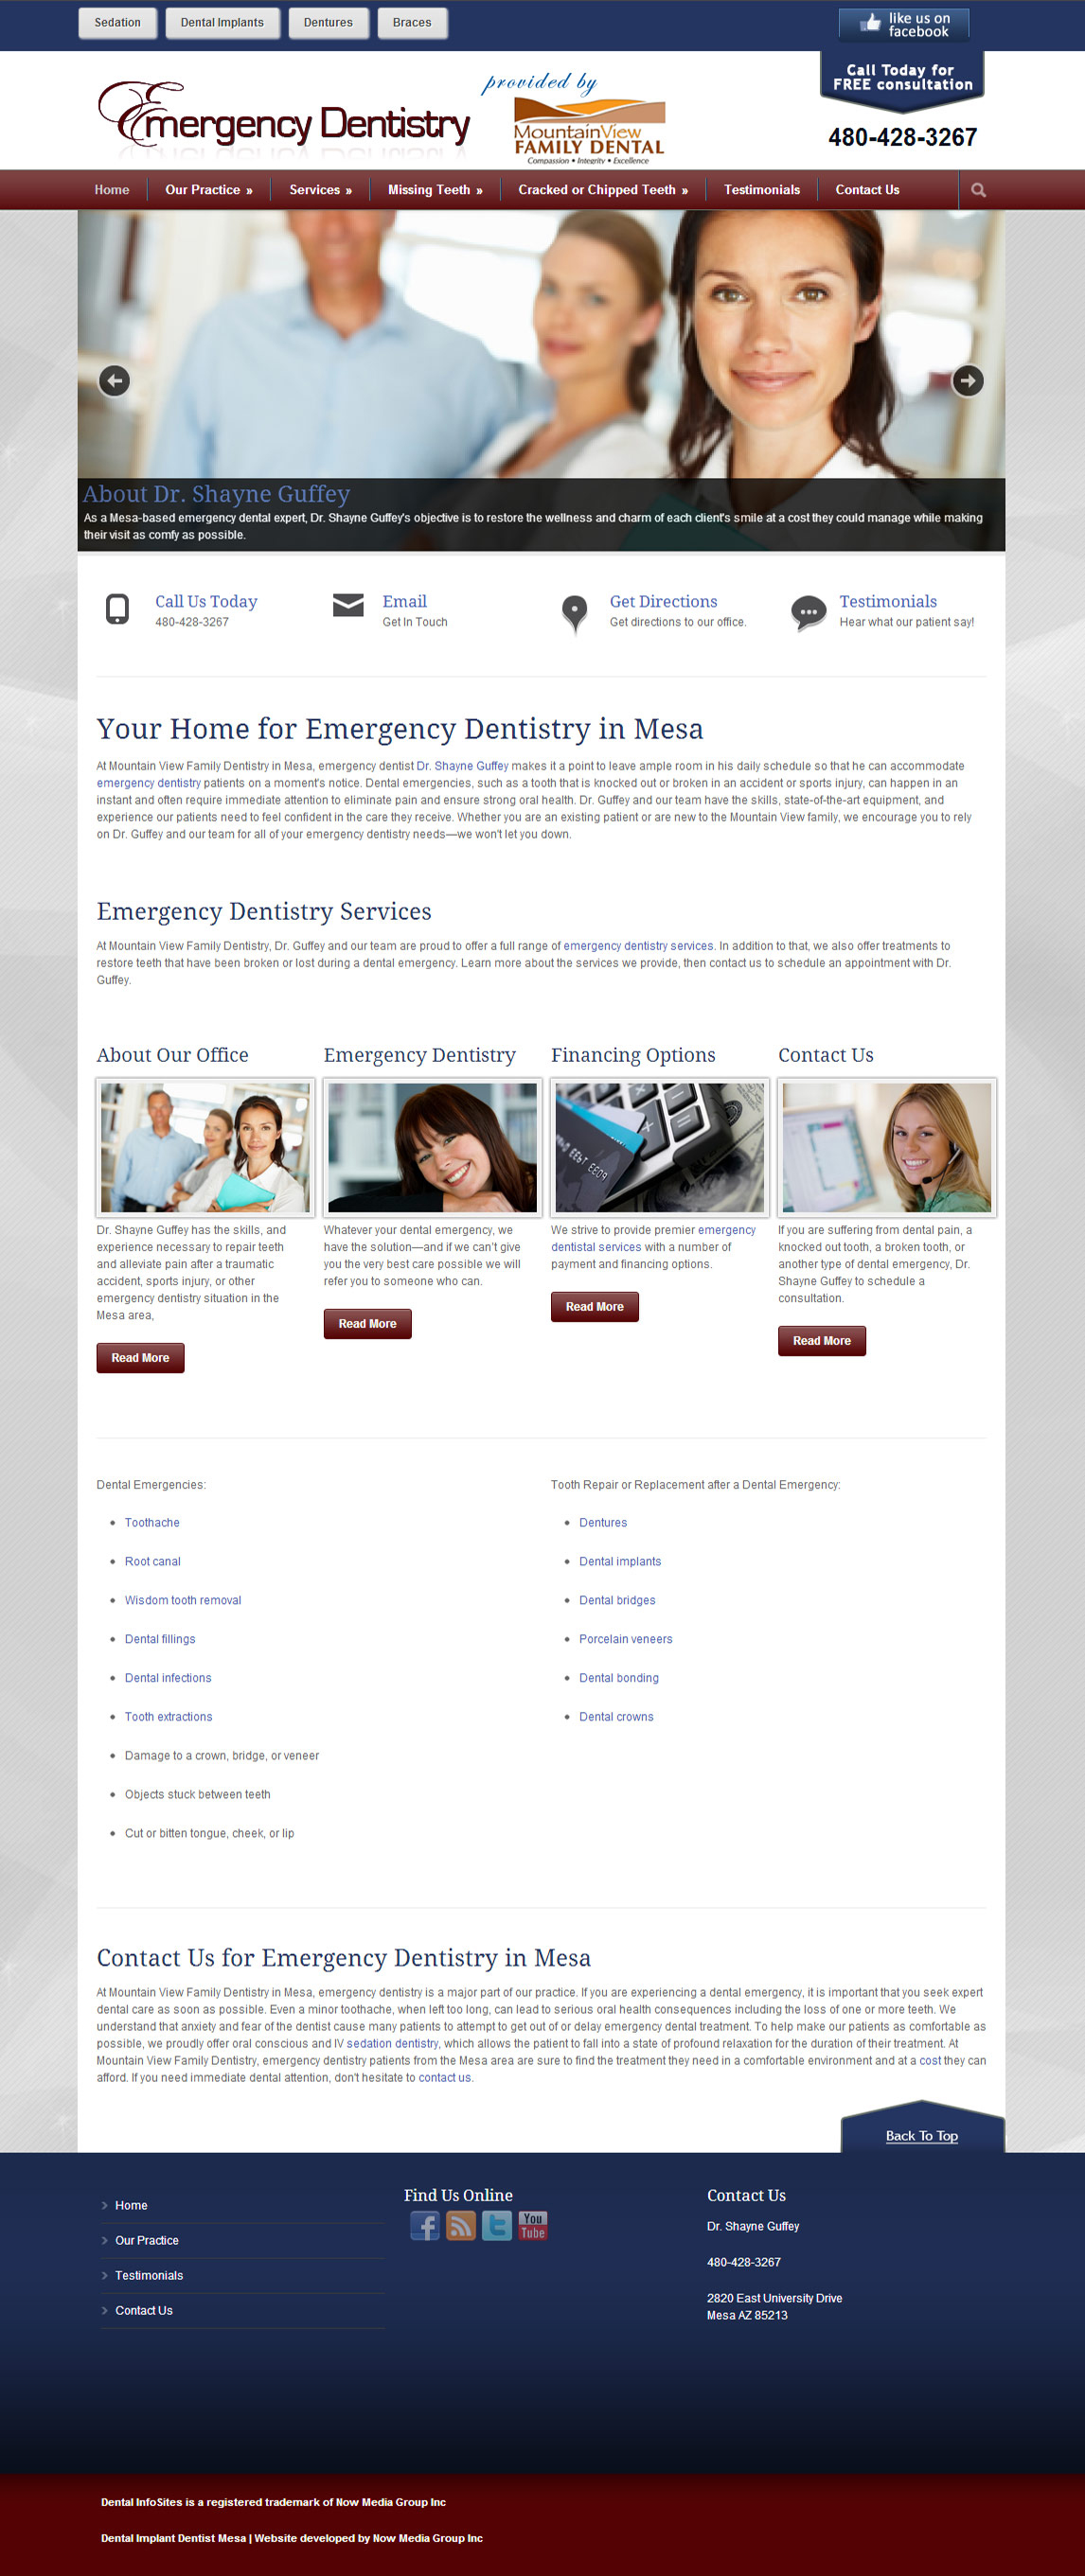 Emergency Dentistry InfoSite by Now Media Group